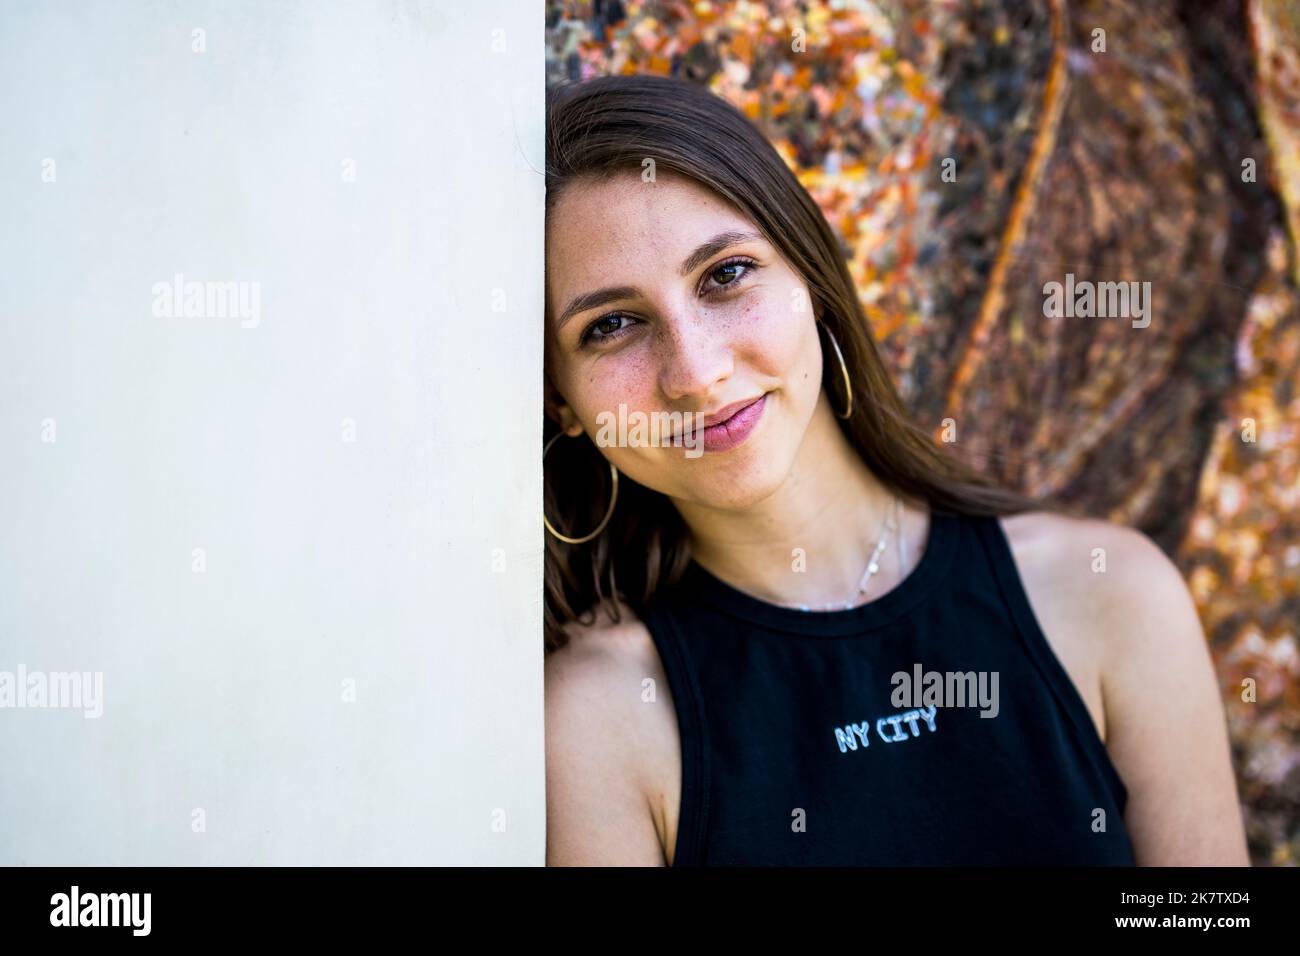 Portrait of an Athletic Young Woman Against a Background with Warm Tones Stock Photo